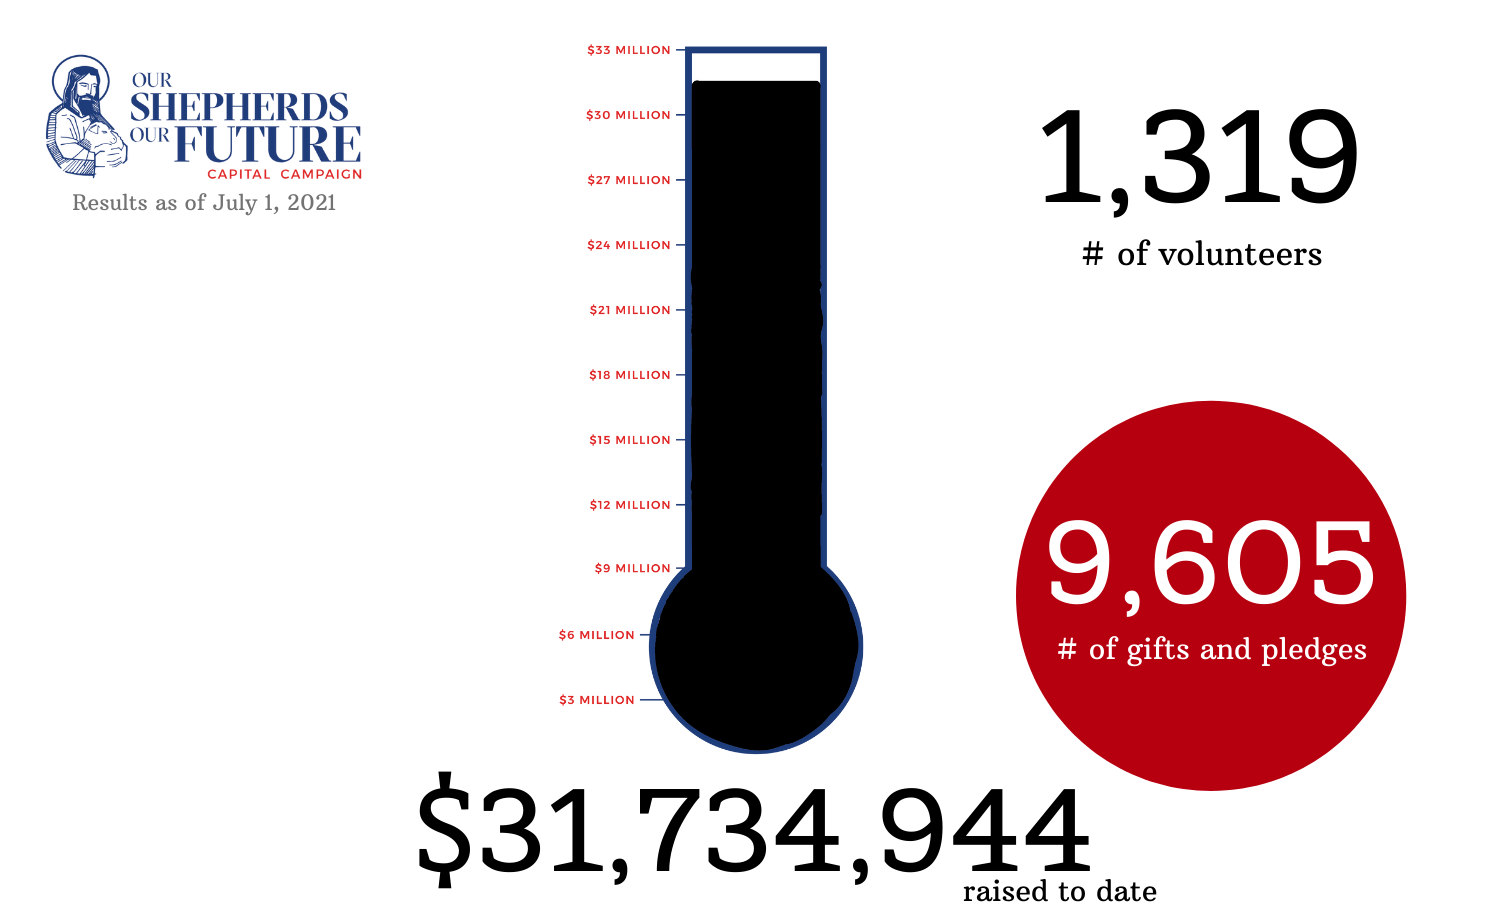 Graphic showing $31,734,944 raised for Our Shepherds- Our Future Capital Campaign as of July 1, 2021